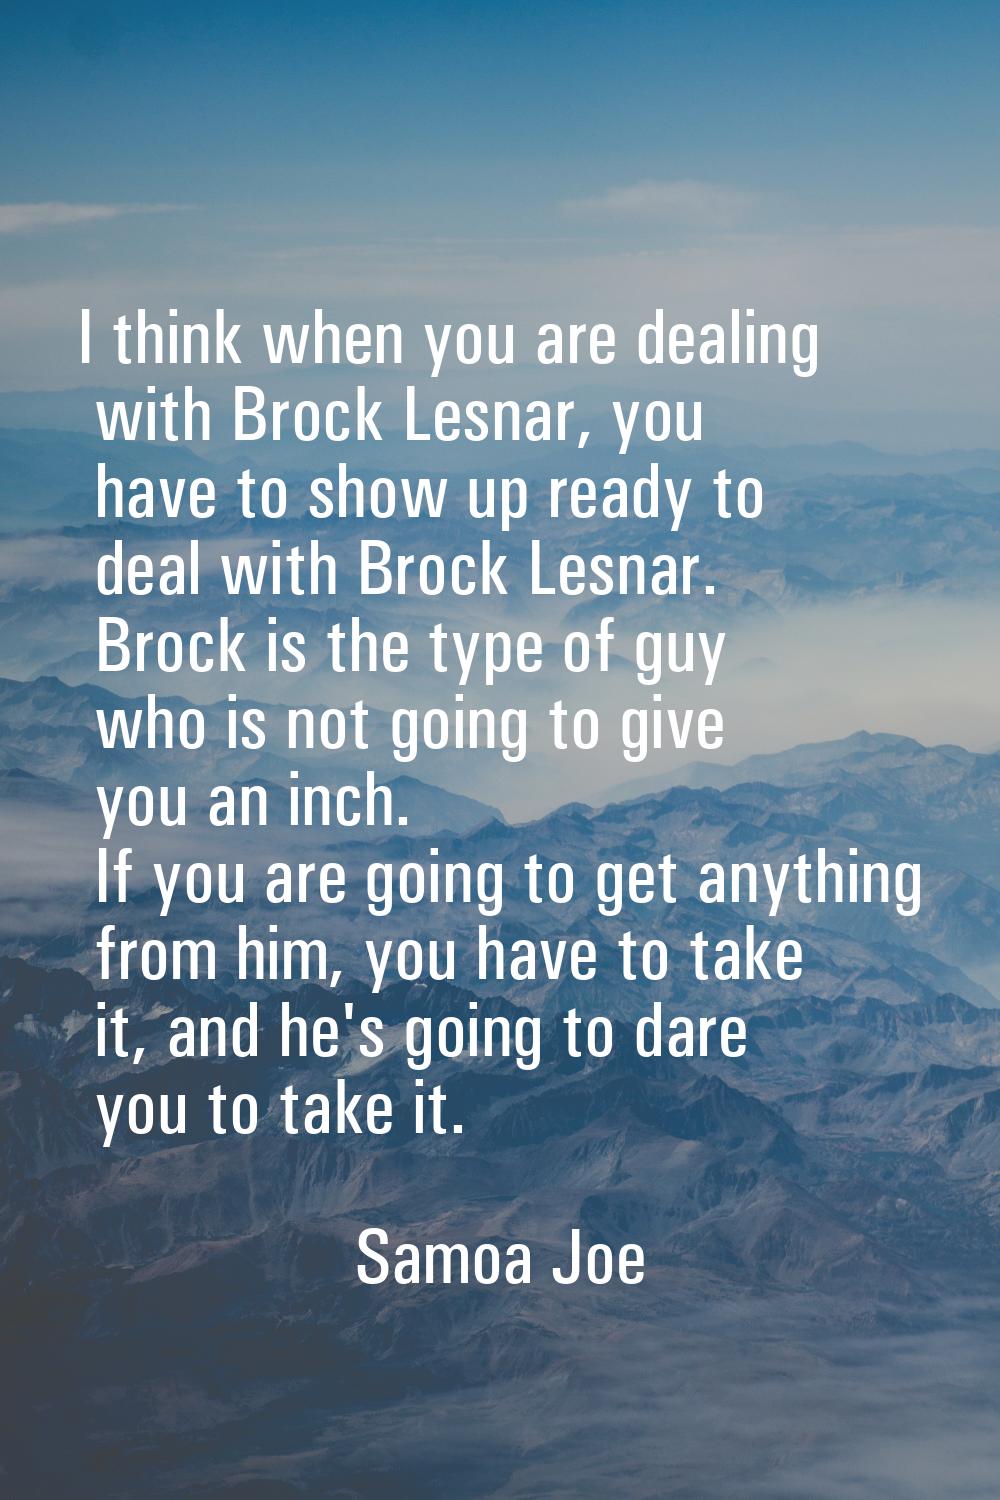 I think when you are dealing with Brock Lesnar, you have to show up ready to deal with Brock Lesnar